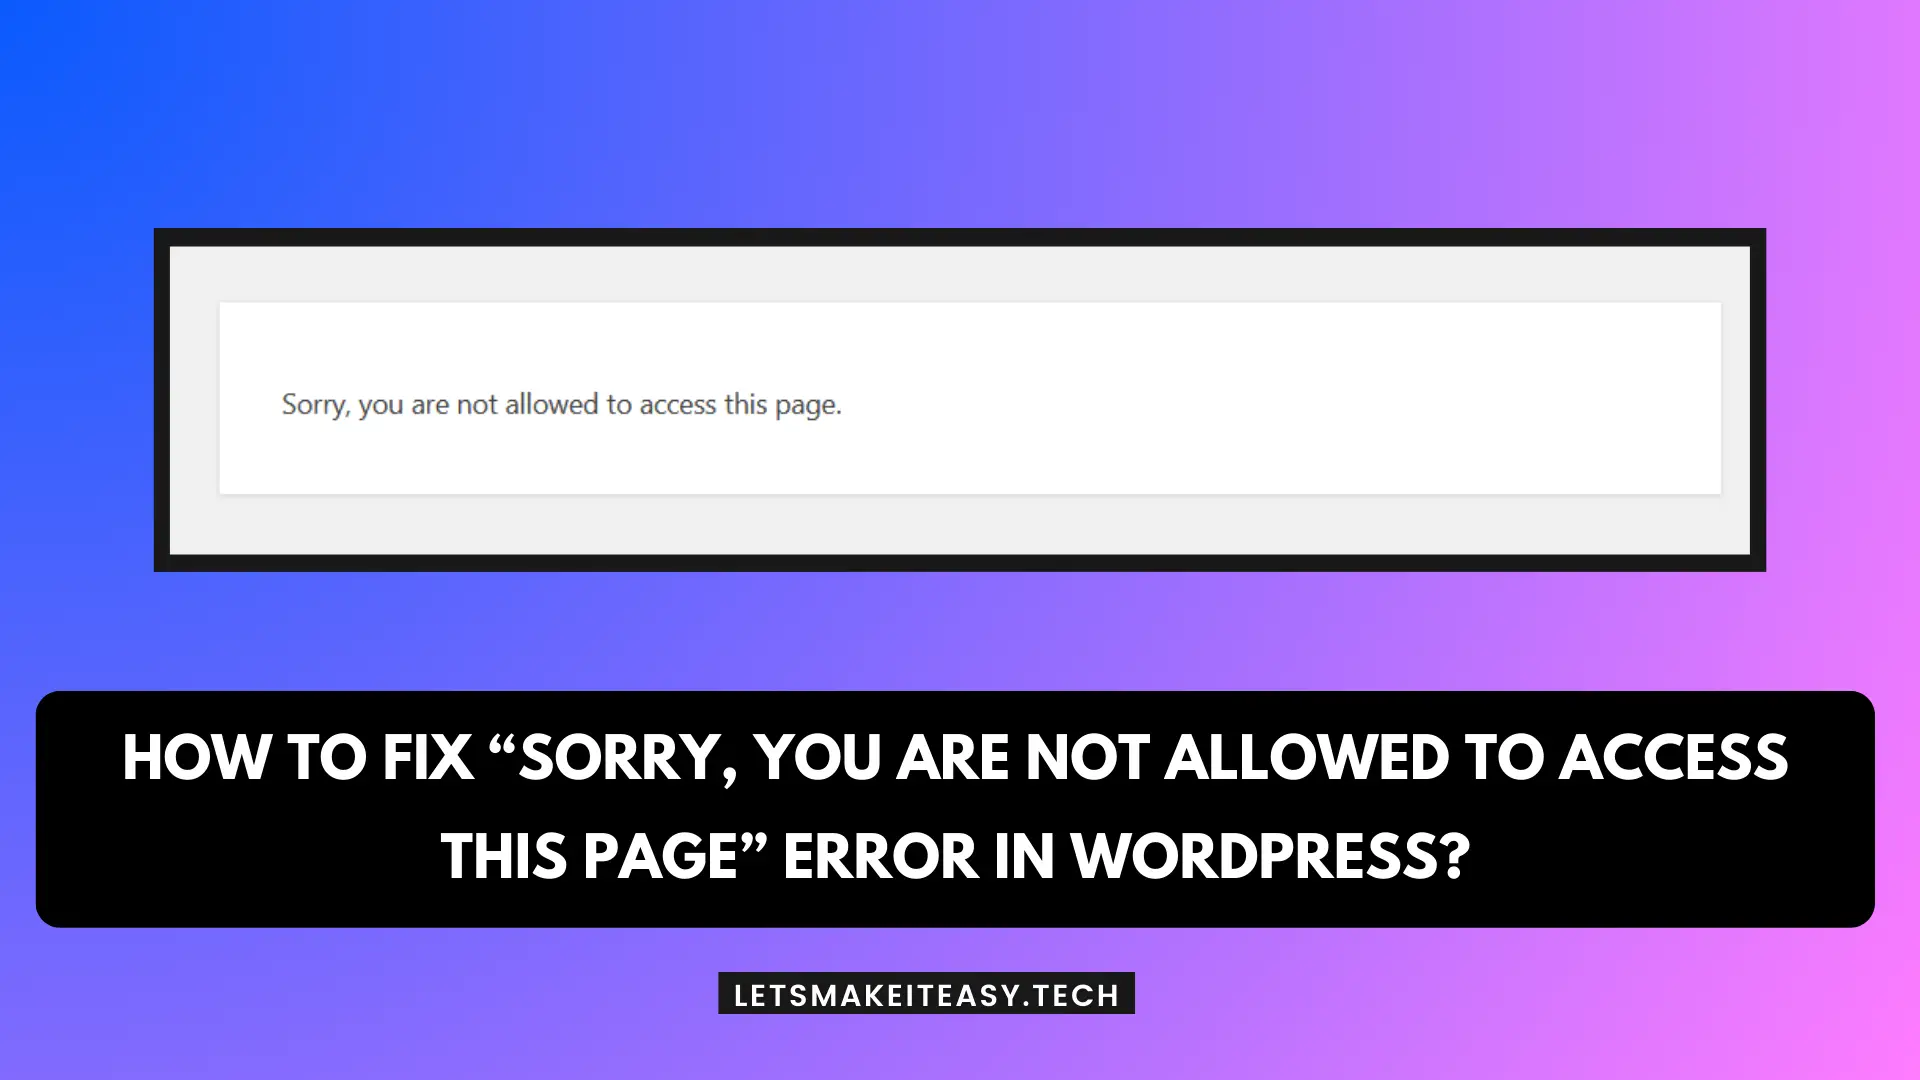 How to Fix “Sorry, you are not allowed to access this page” Error in WordPress?